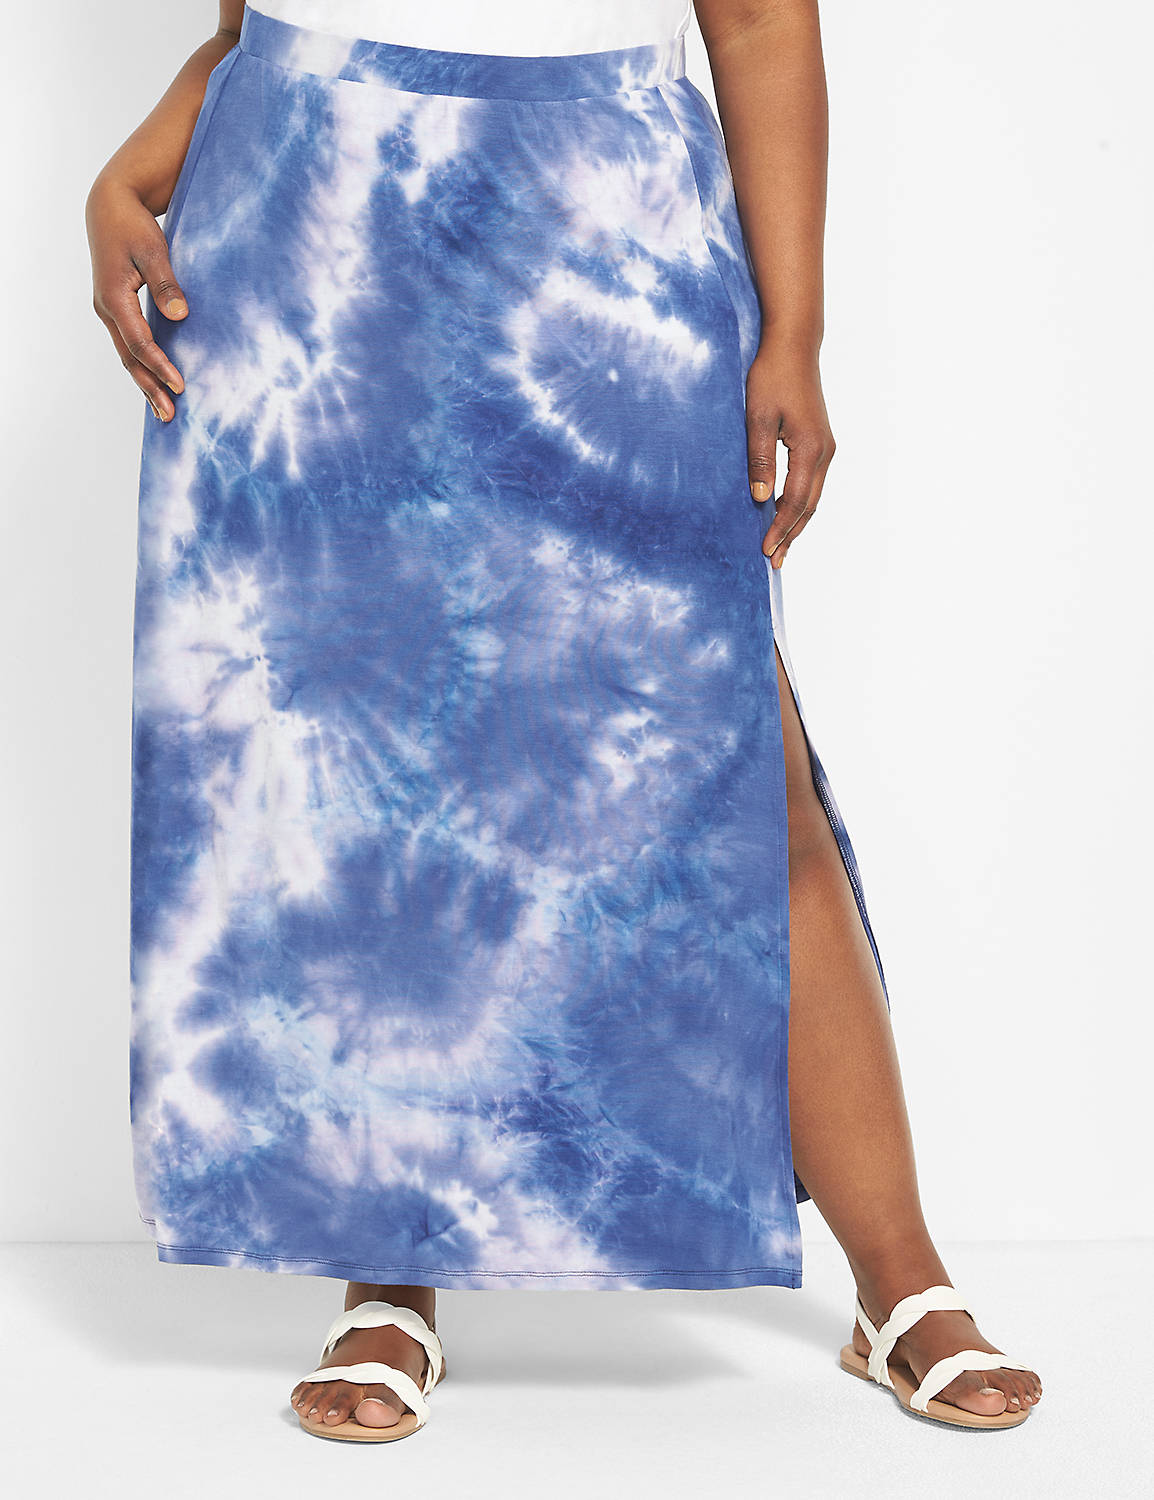 Pull On Knit Maxi Skirt - Tie Dye 1 Product Image 1